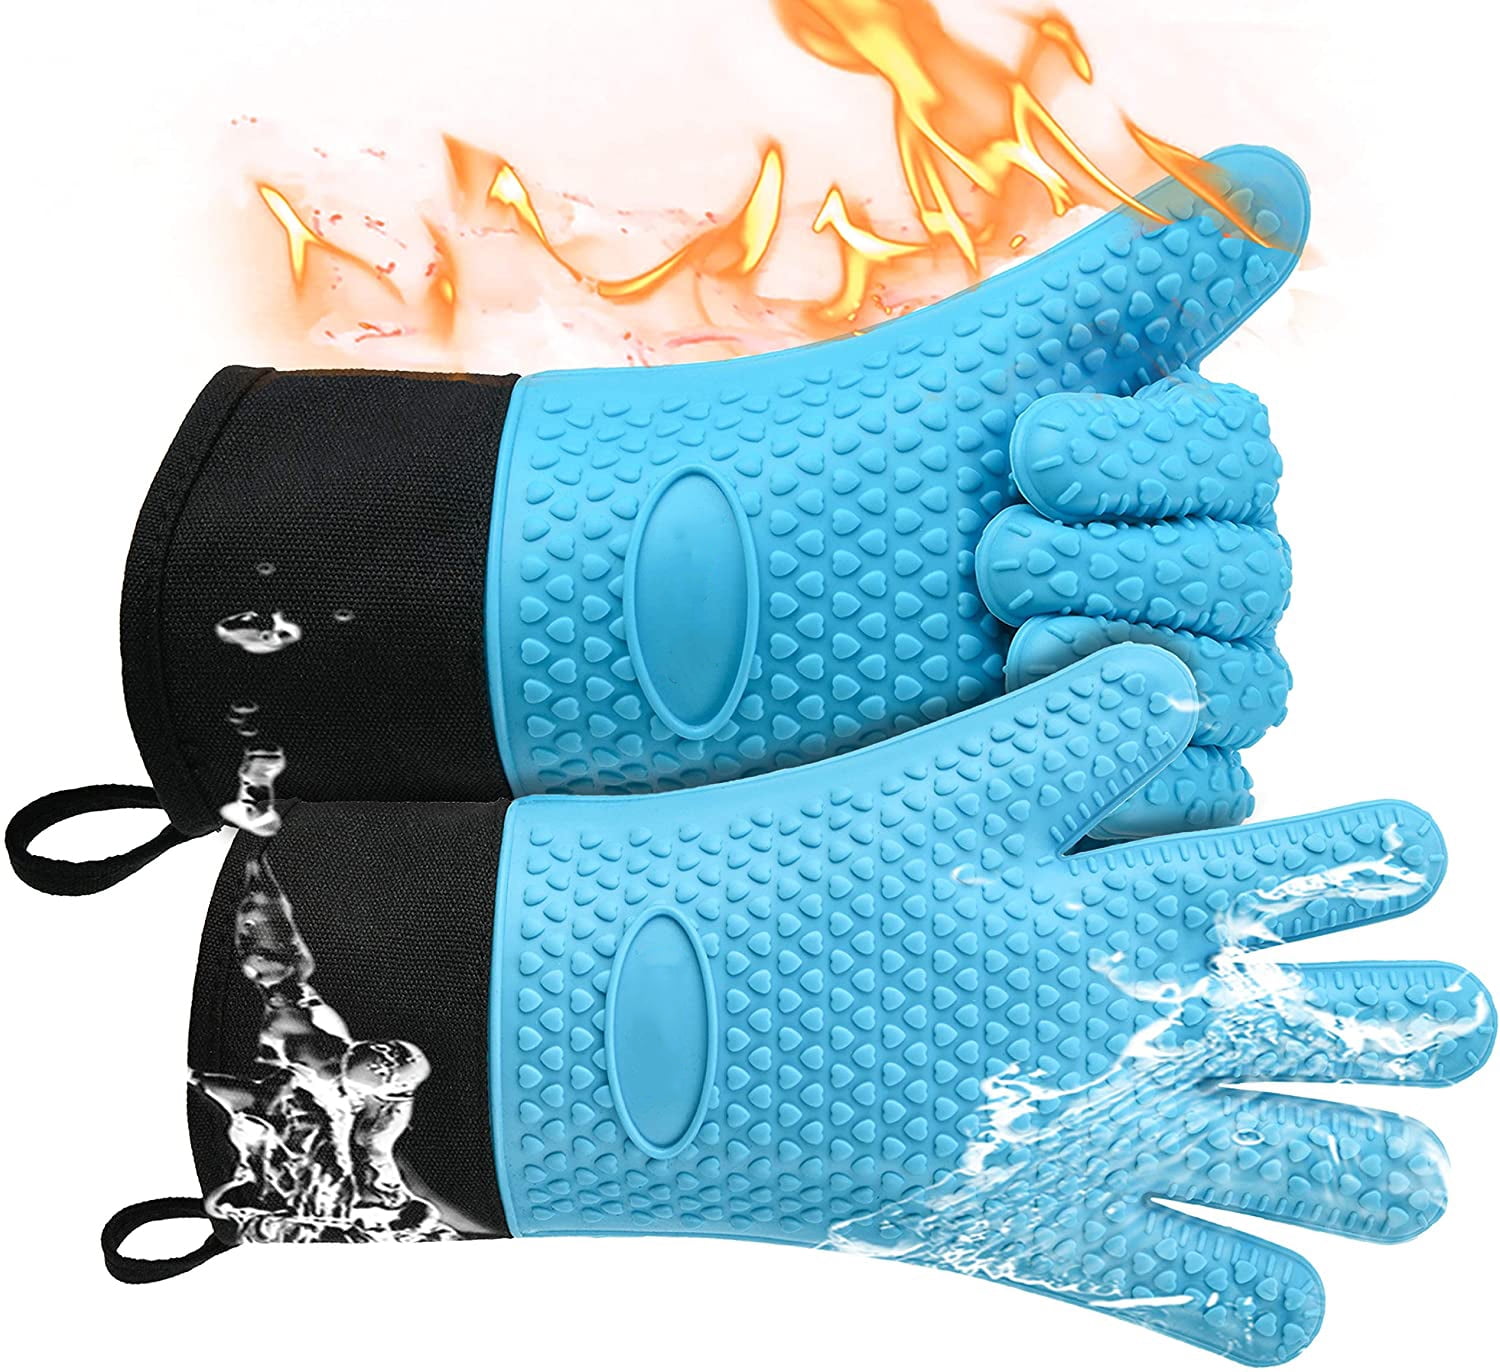 Details about   AMAZING OVEN GLOVE WITH FINGERS